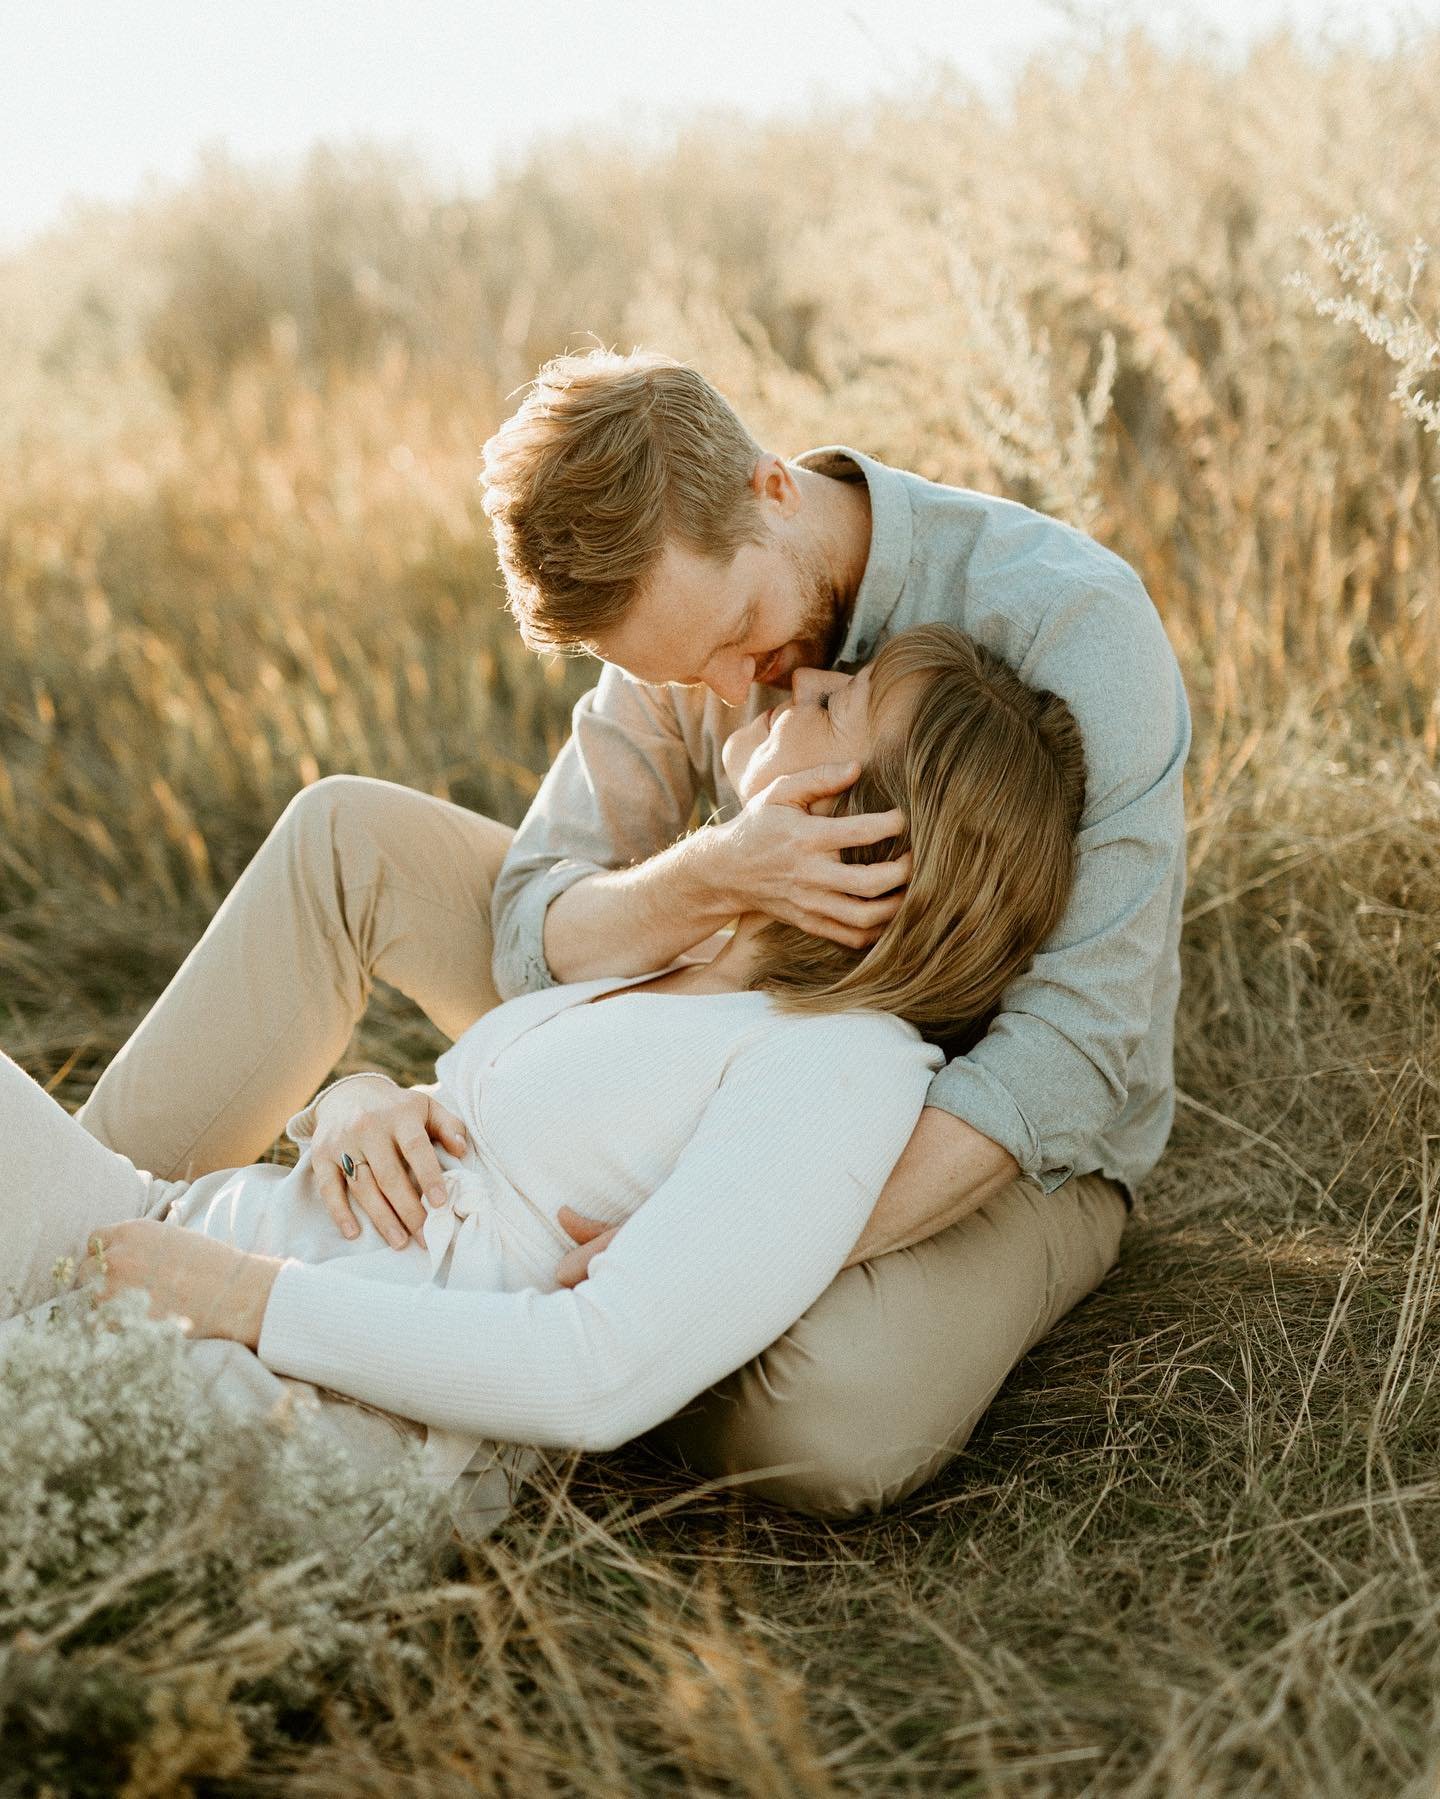 Woman in white shirt laying kissing man in the grass